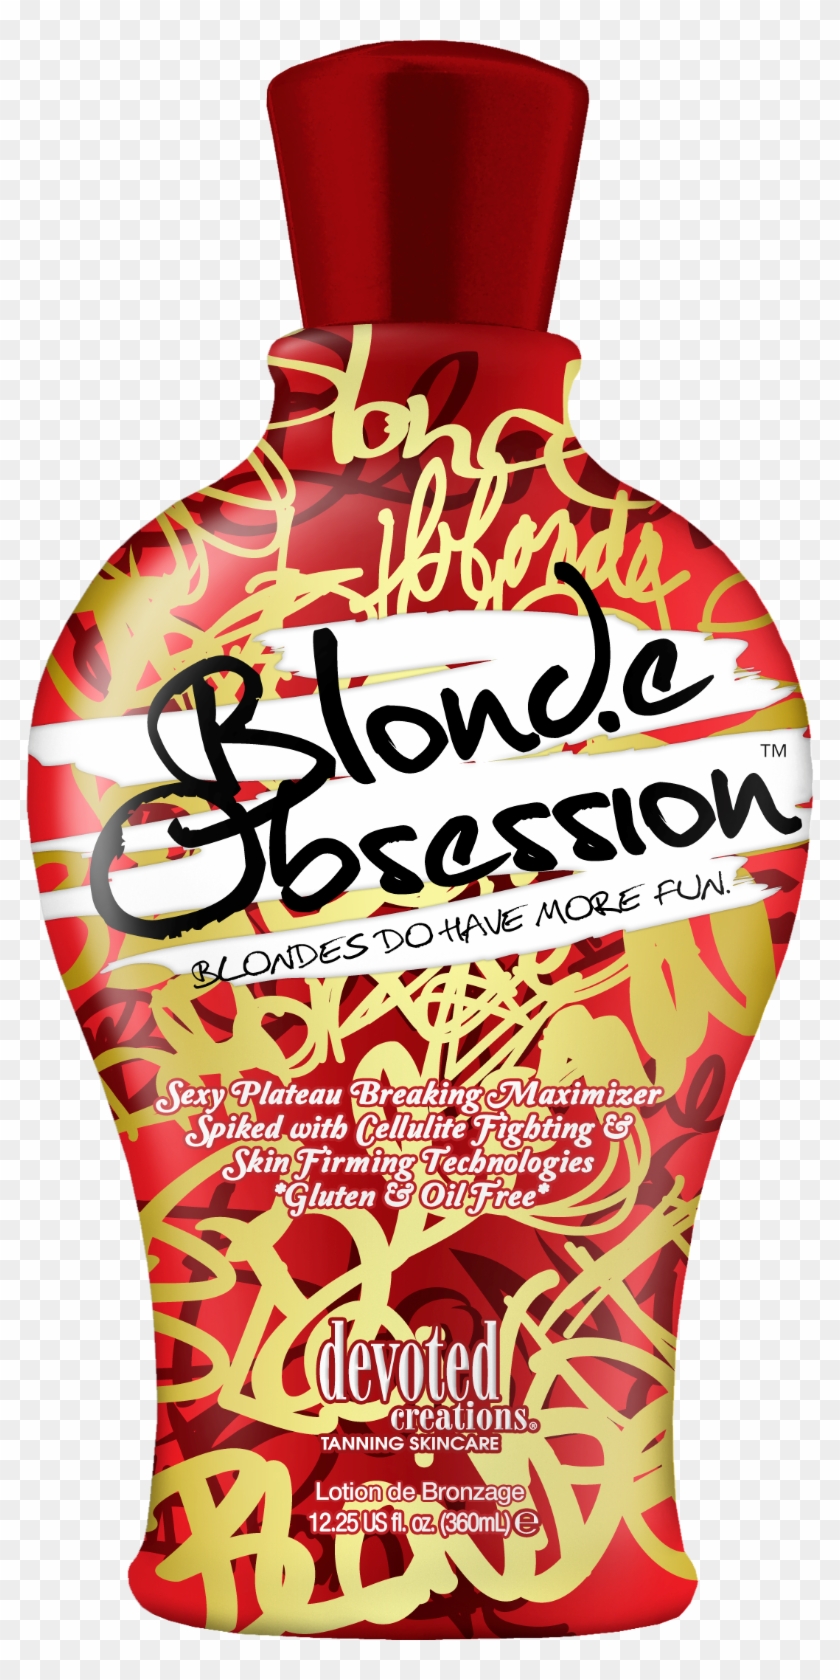 Devoted Creations Blonde Obsession Plateau Breaking - Devoted Creations Blonde Obsession Plateau Breaking #1543127